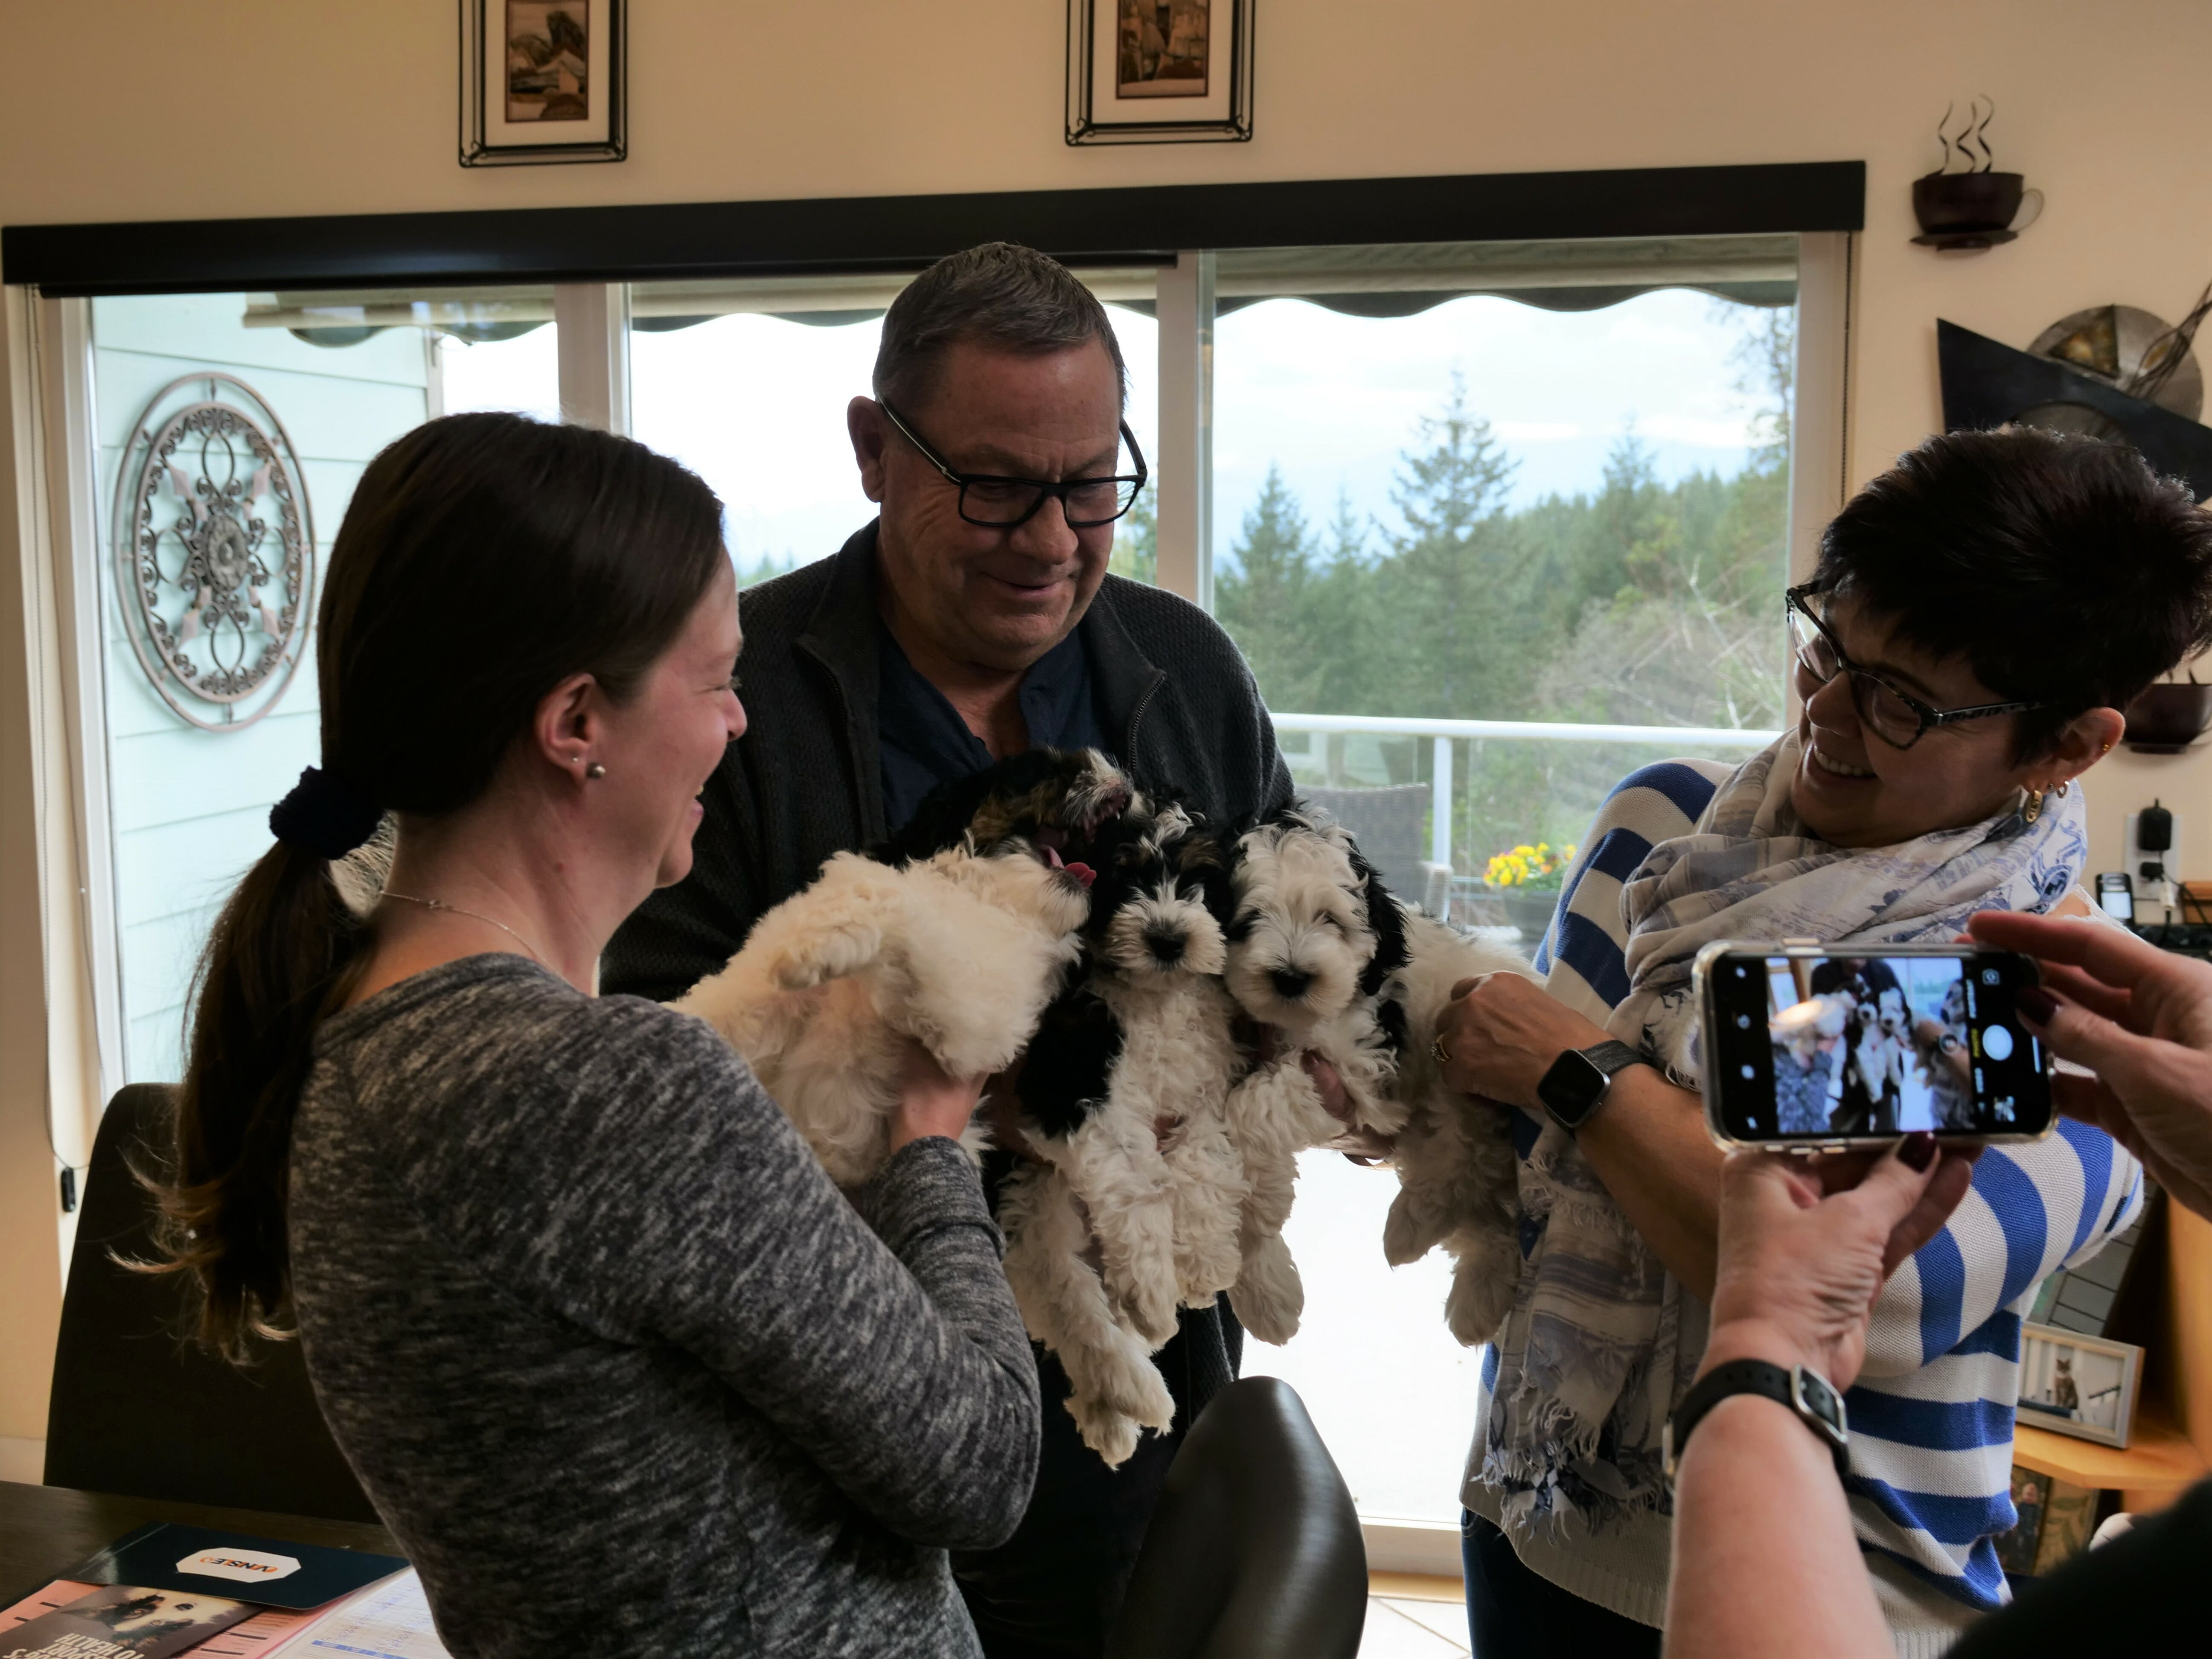 3 happy looking adults are standing close together while holding their new 8-week old black and white labradoodle puppies